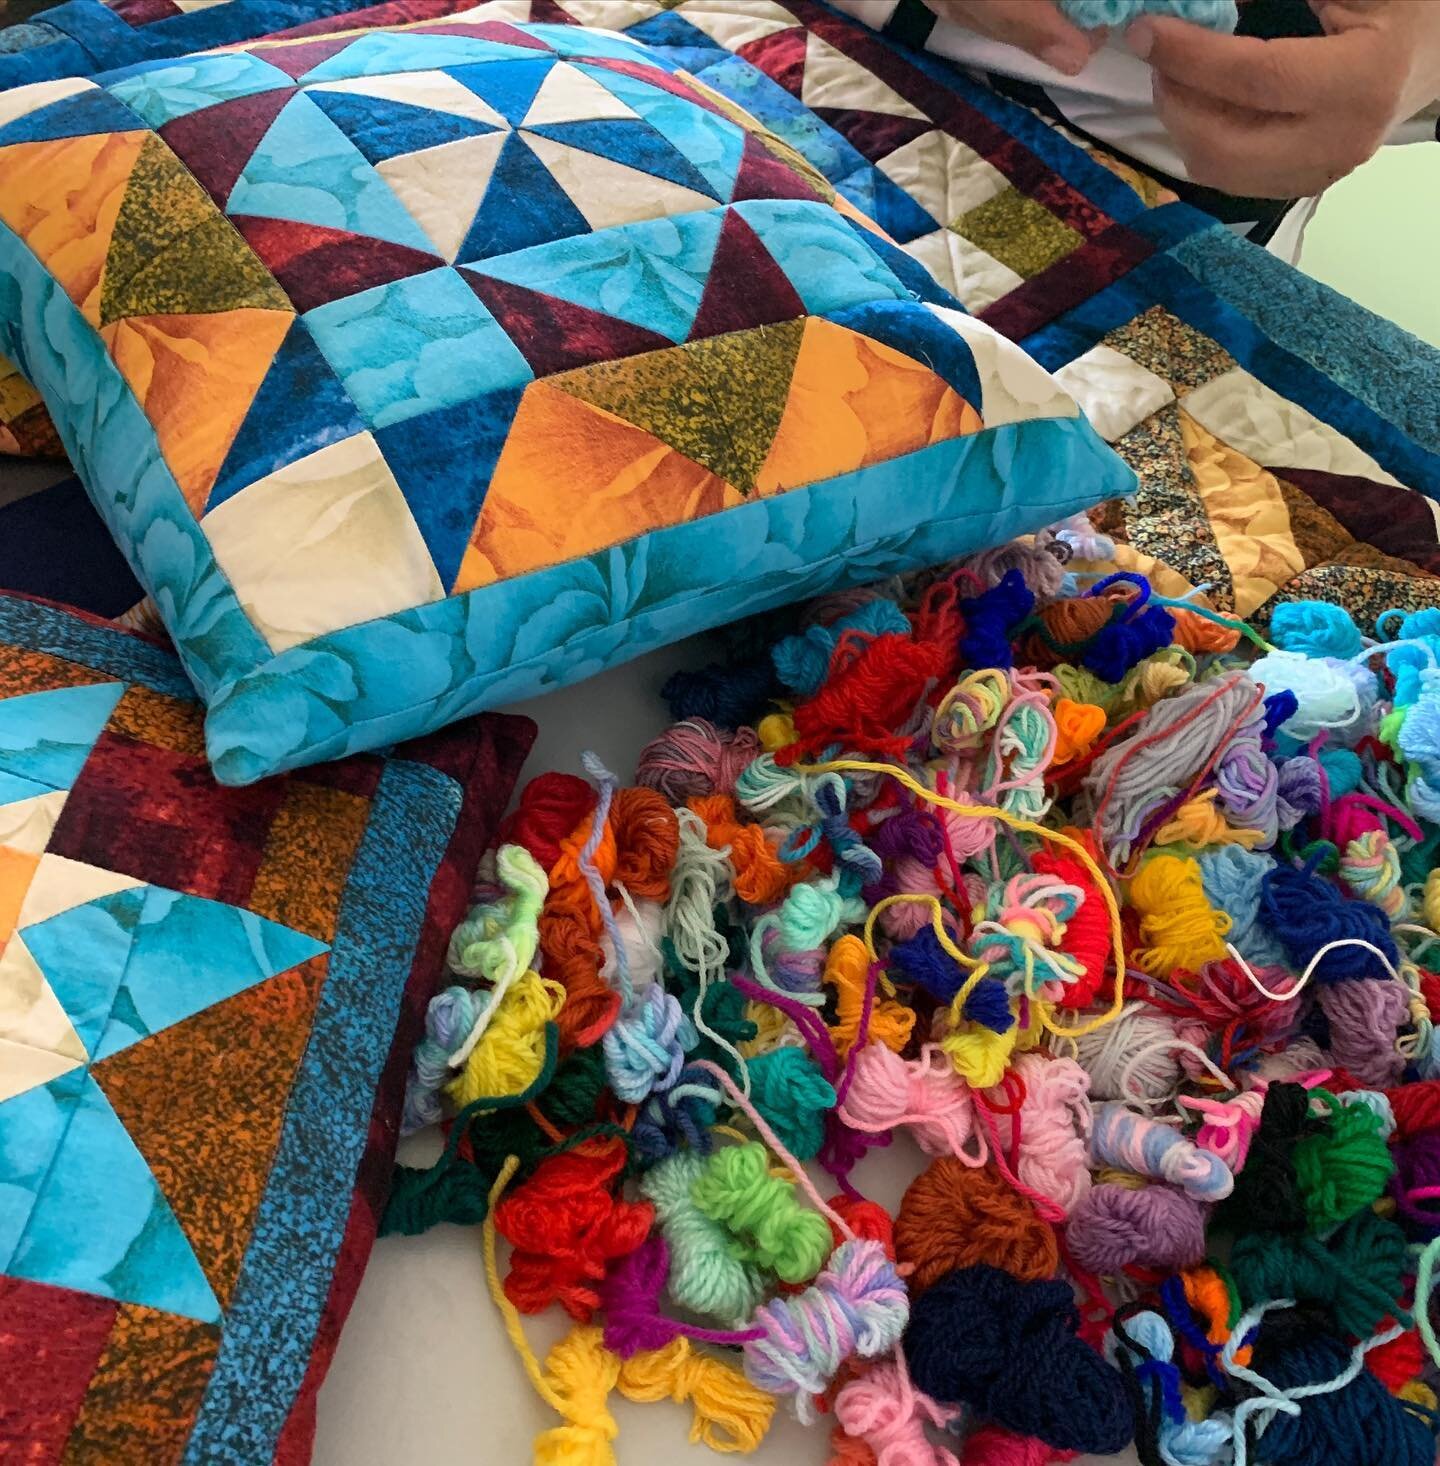 Kohna Zari Ko members are excited to bring some new items for sale soon. And our online commissions are always open! Check out our website, link in bio.
Keep in touch!
#craft #making #quilting